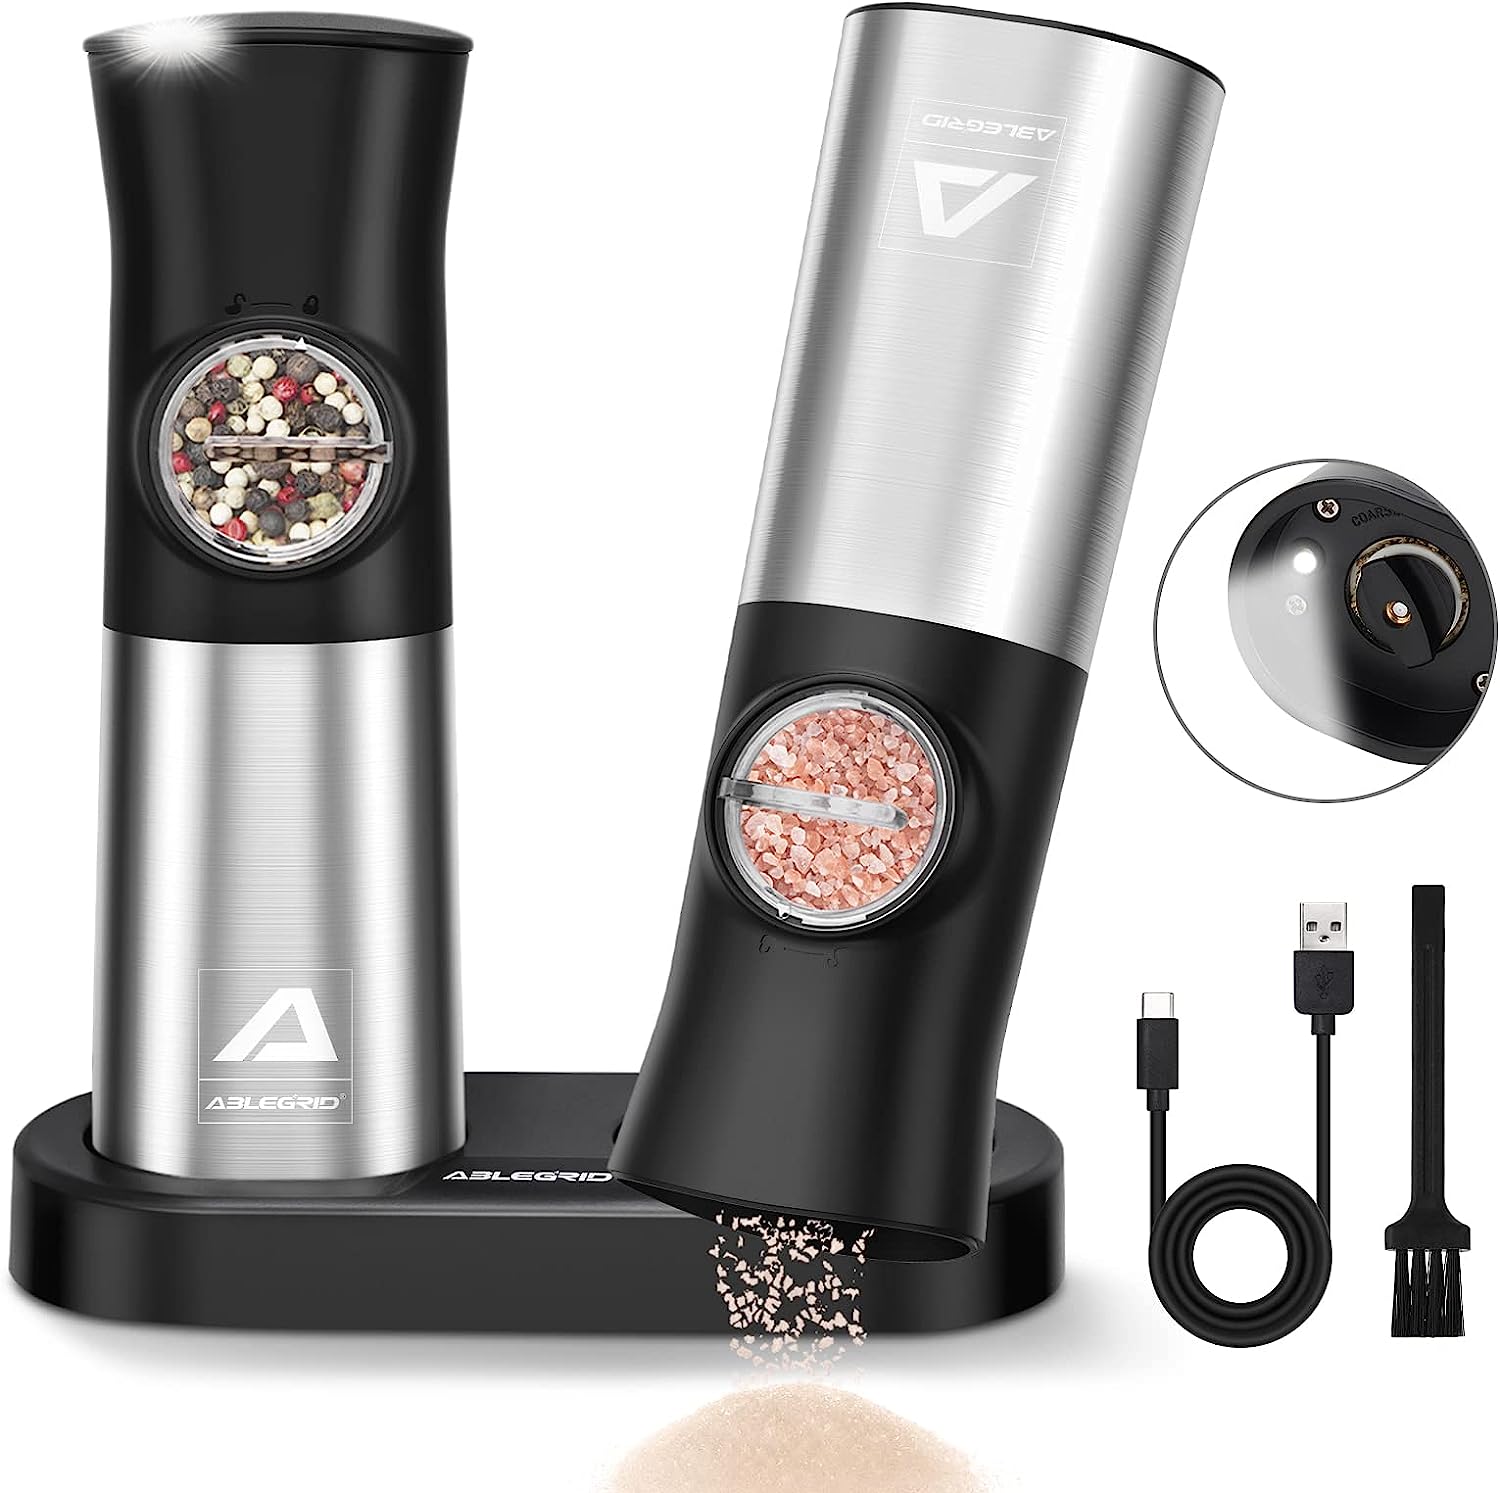 Gravity Electric Salt Pepper Grinder Set Automatic Salt and Pepper Mill  Grinders With LED Light Stainless